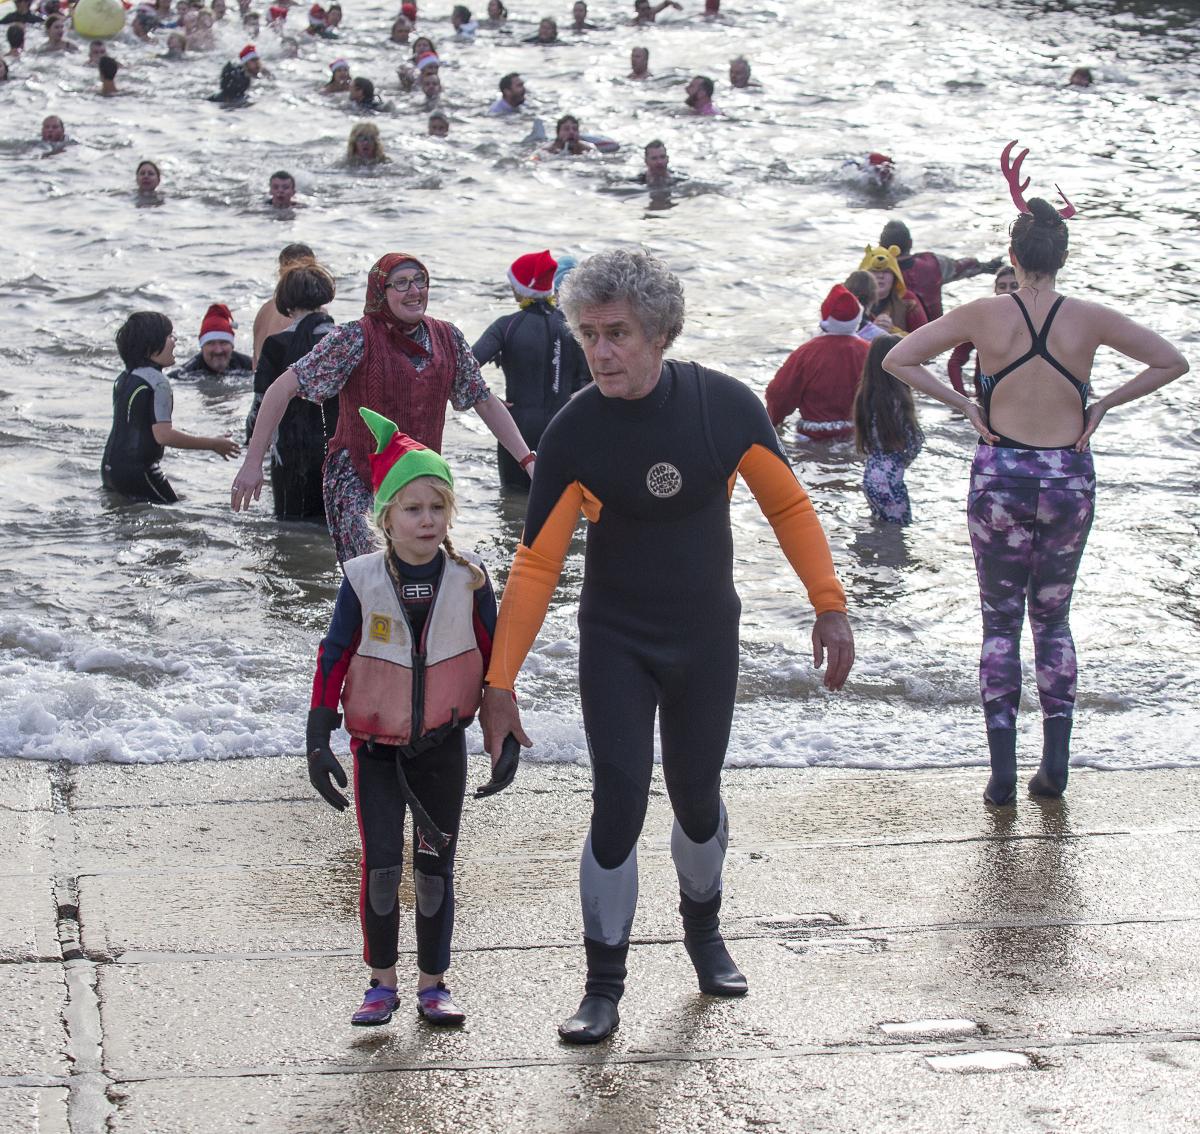 Huge crowds turned out to cheer on swimmers at West Bay Wallow 2016.